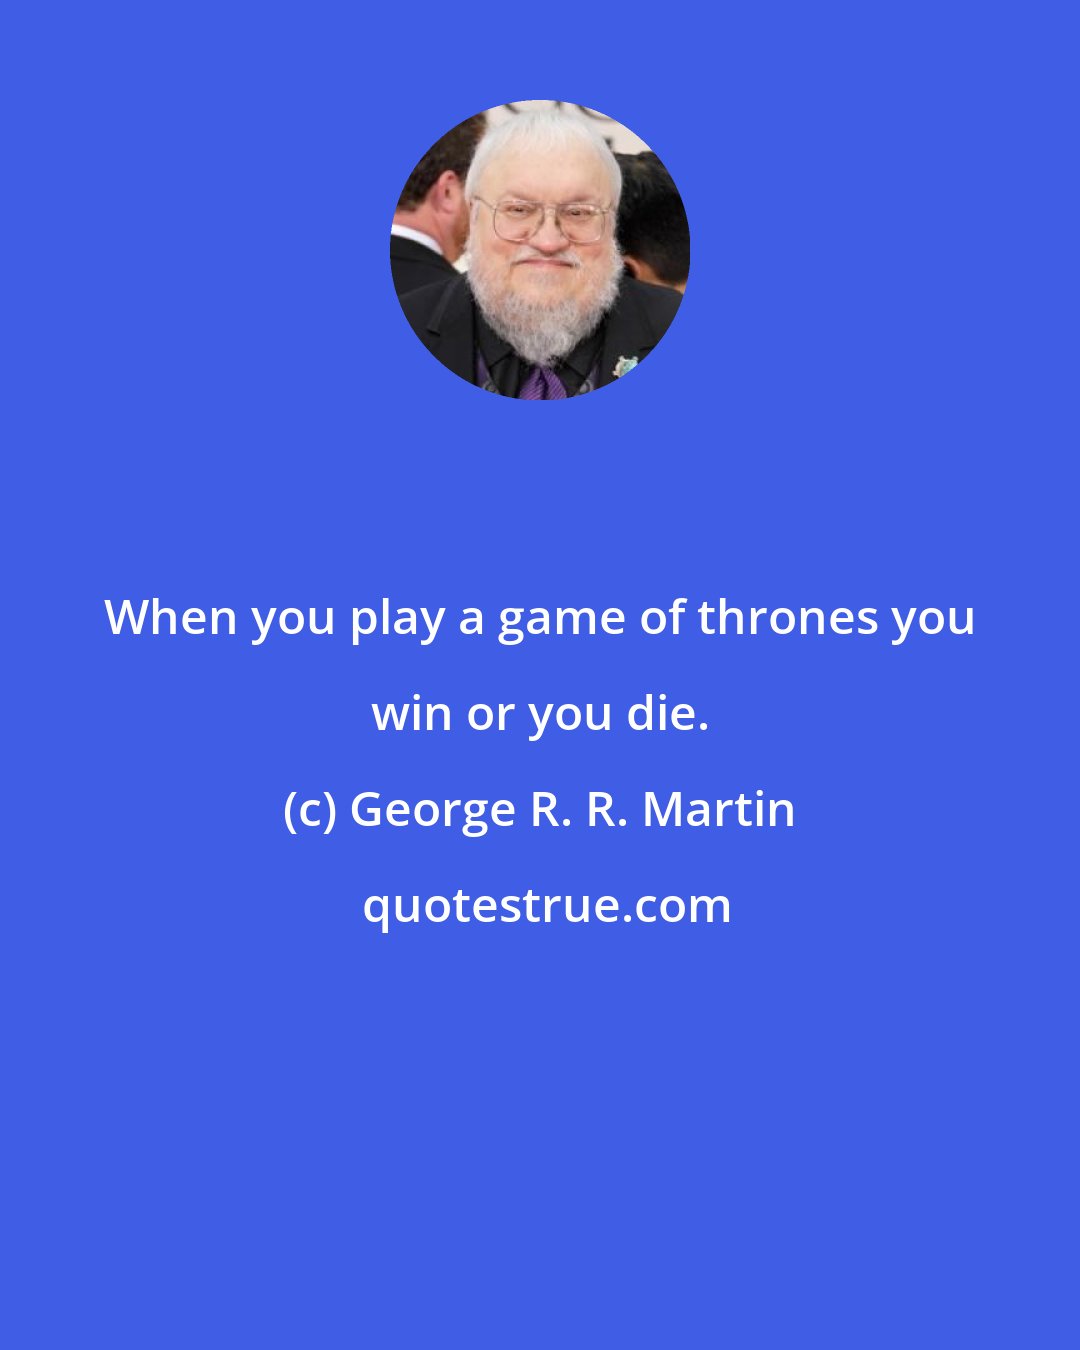 George R. R. Martin: When you play a game of thrones you win or you die.